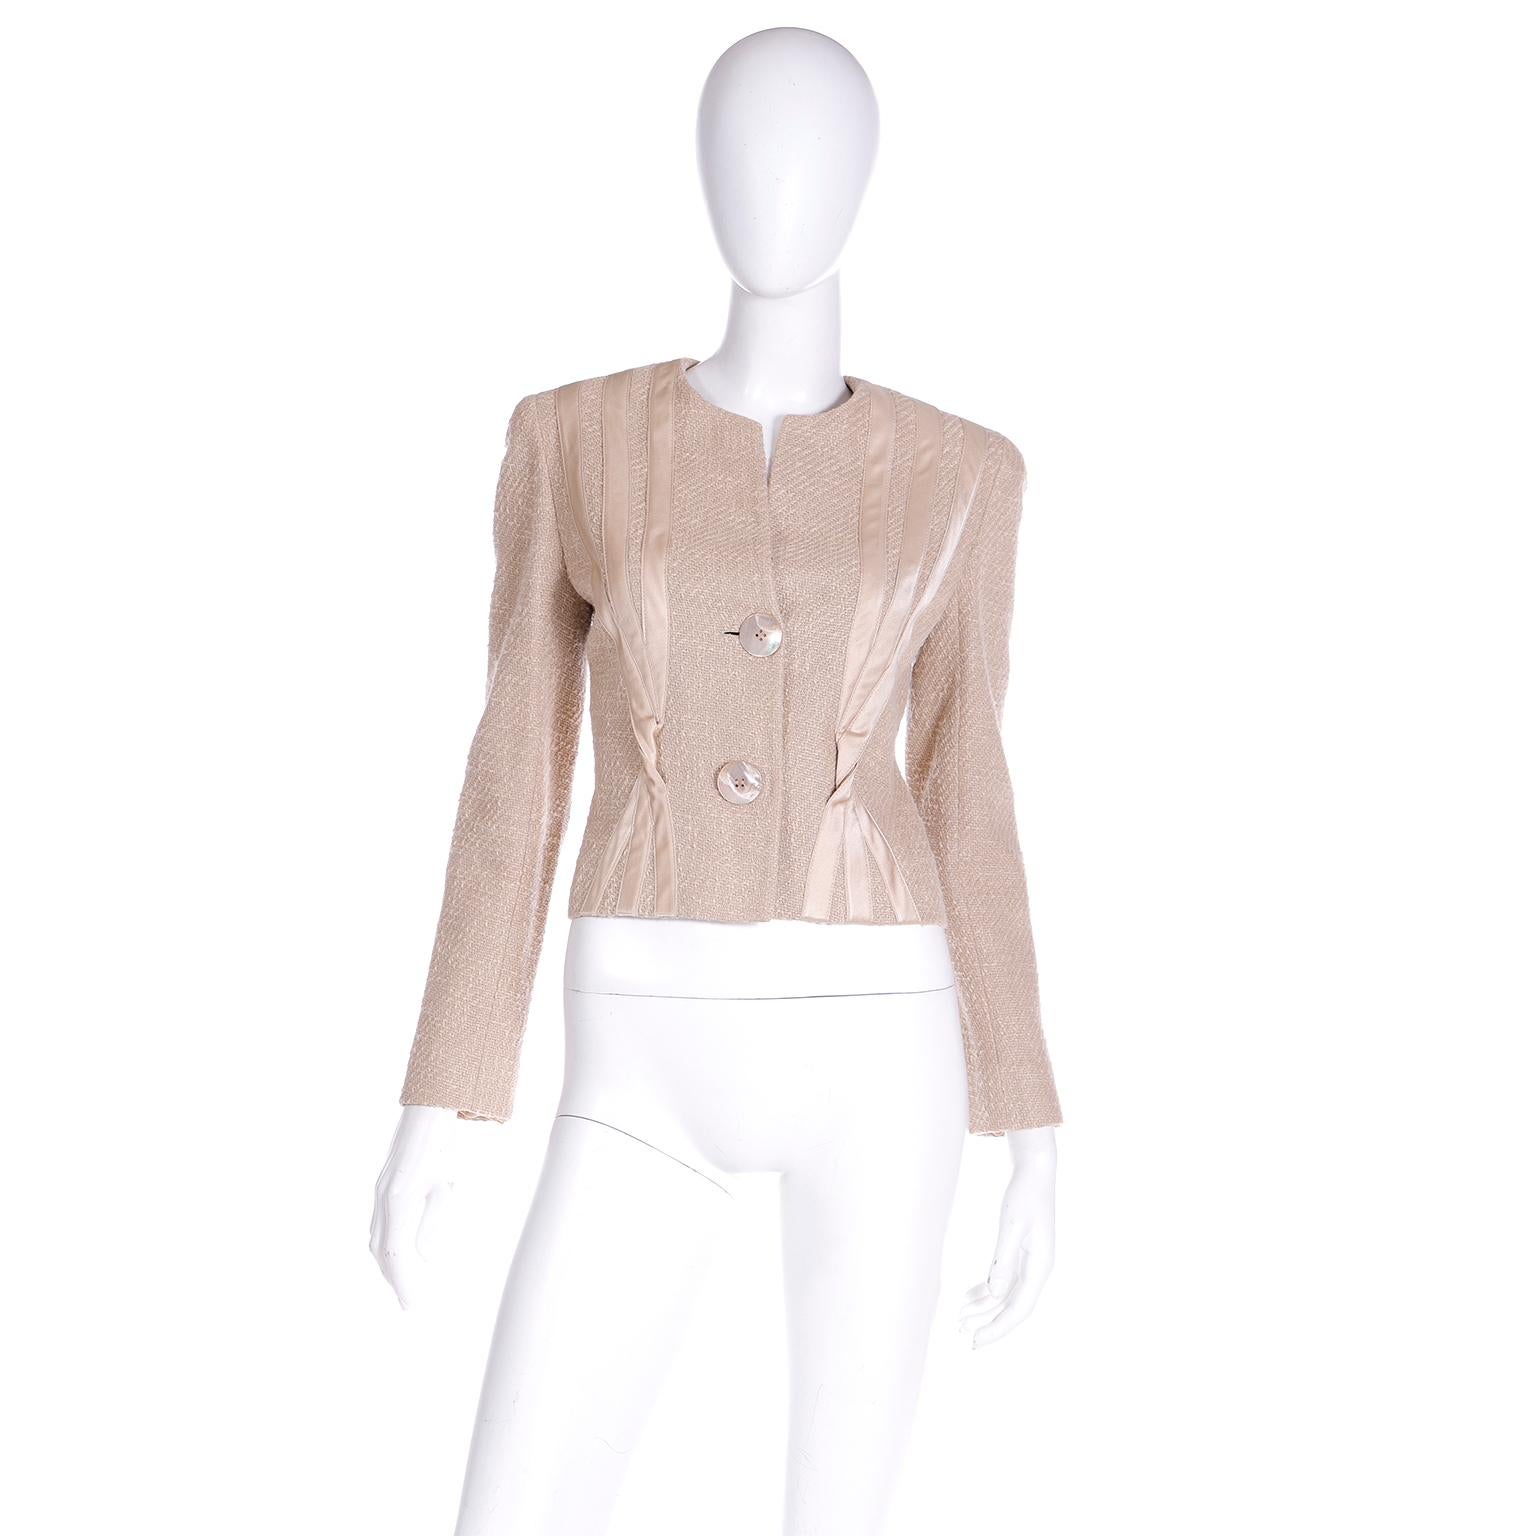 This Valentino cropped jacket is a perfect piece to add to your Spring/Summer wardrobe. Valentino pieces are made to last, so anytime you buy something made by Valentino, you can be sure that it will become a long term part of your closet. 

This